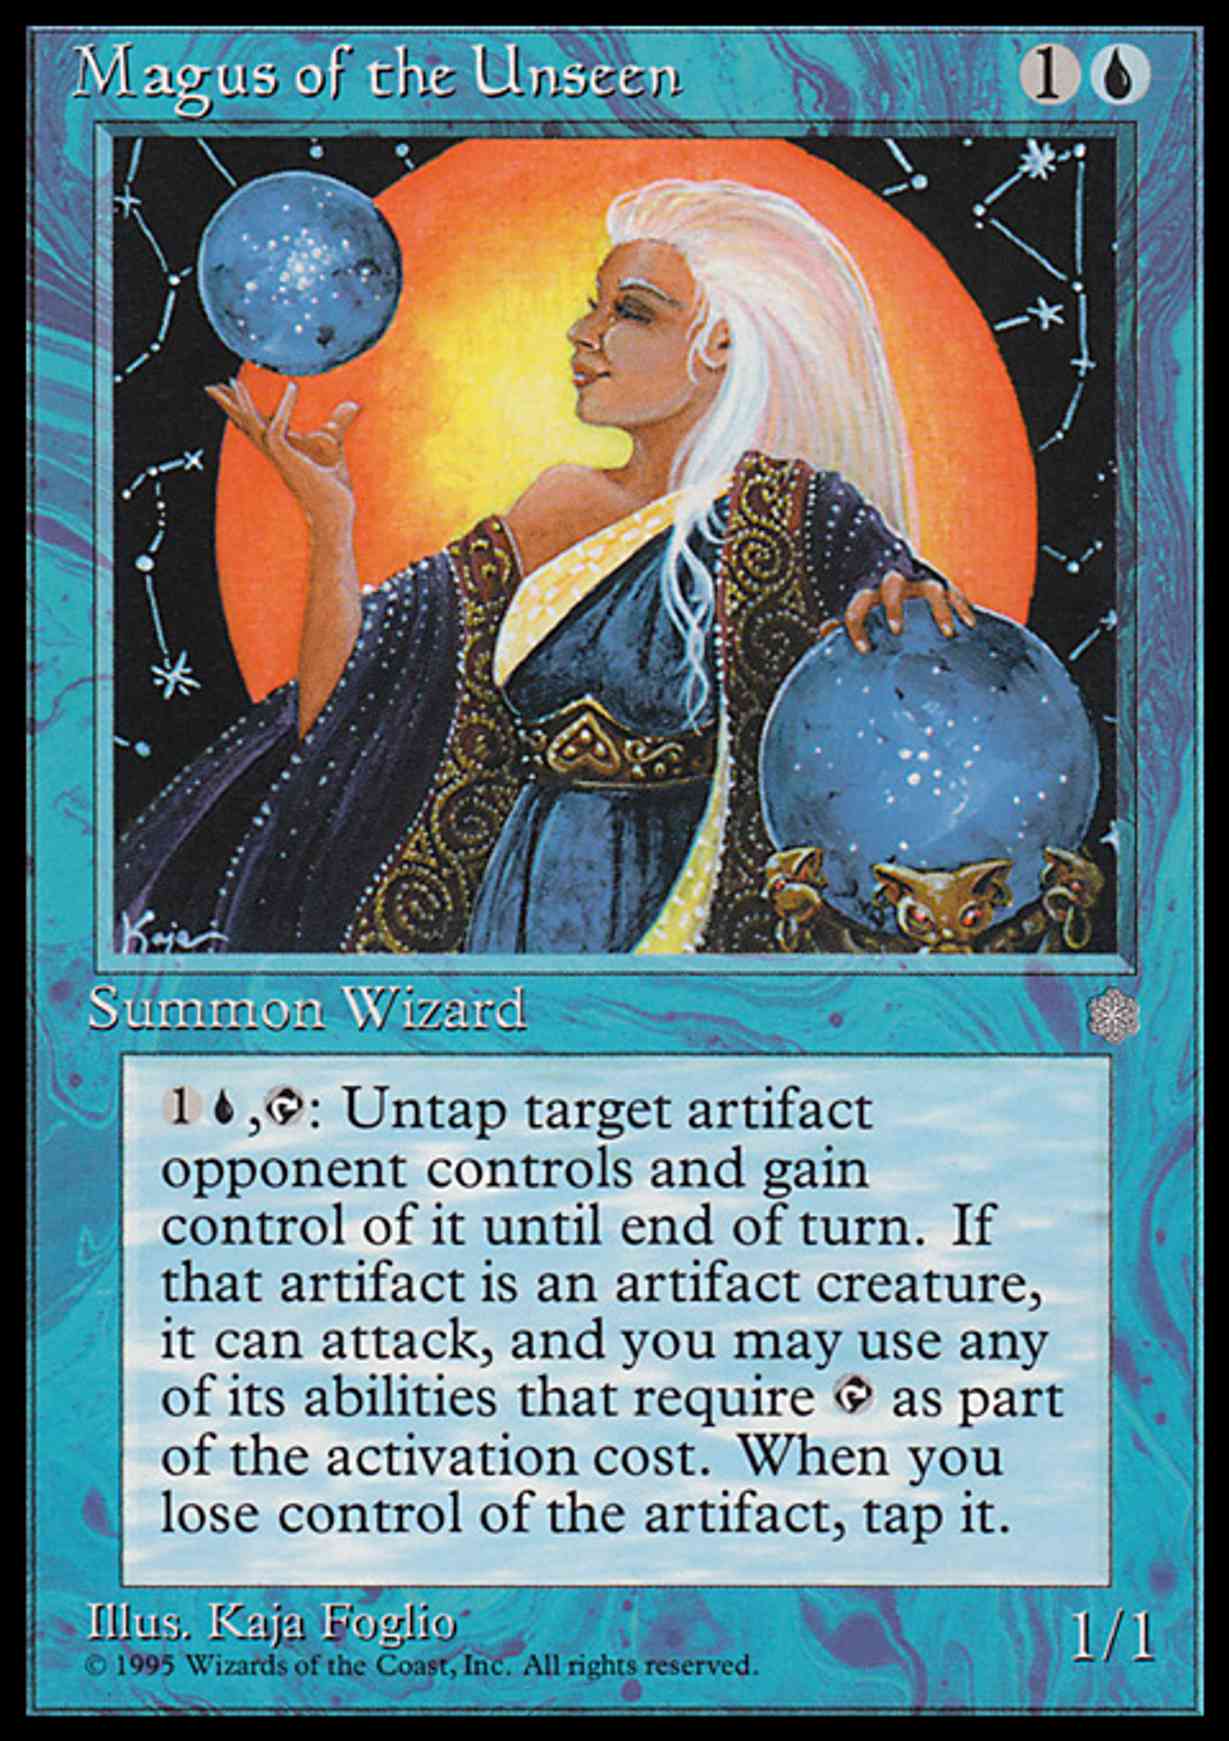 Magus of the Unseen magic card front